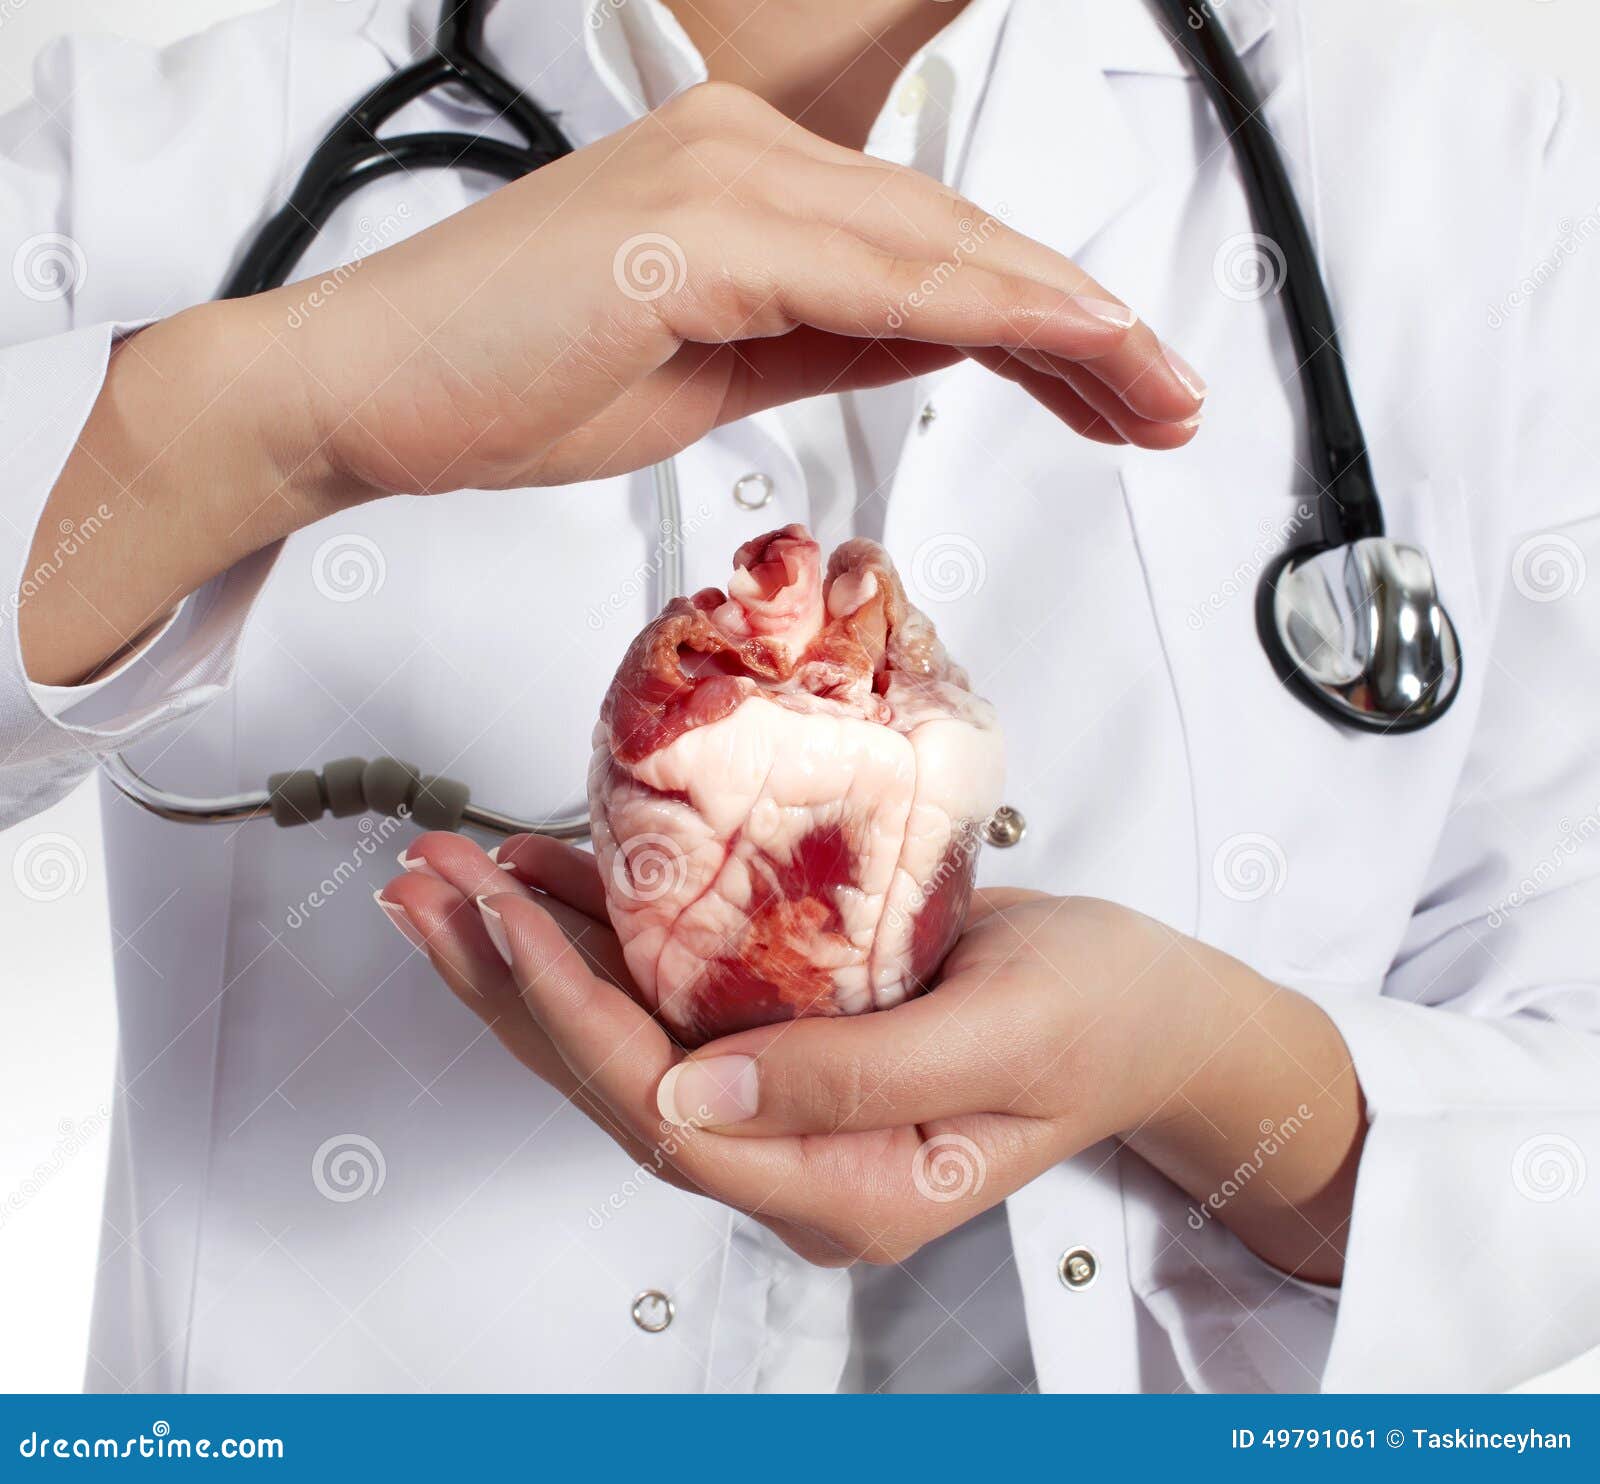 Doctor is Holding Real Heart Stock Image - Image of equipment ...